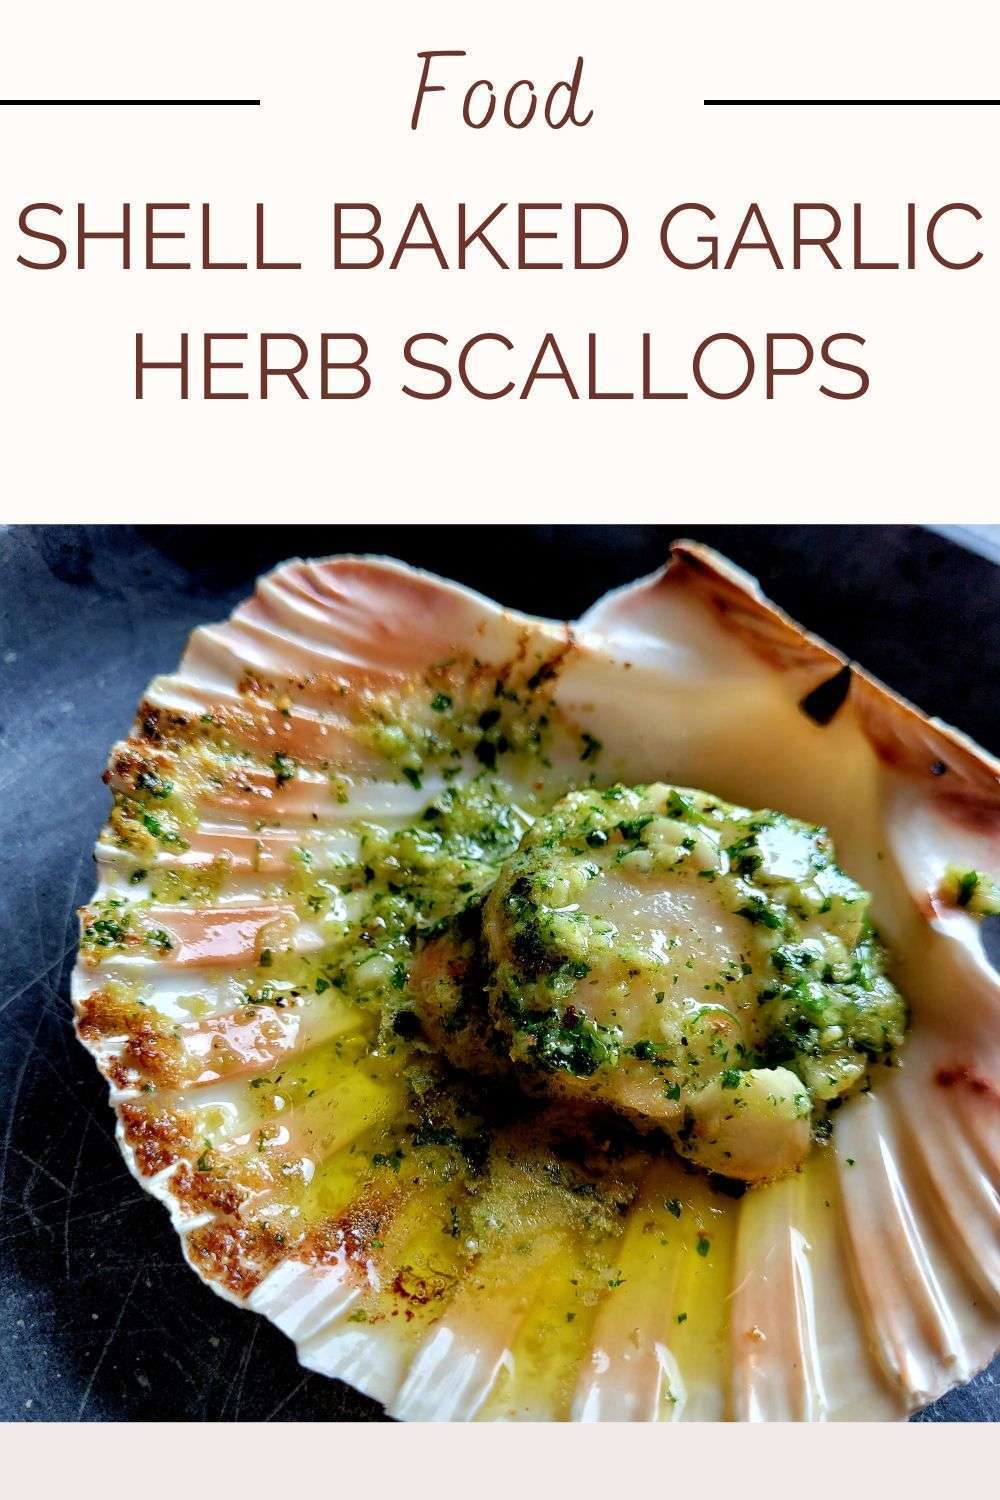 Baked Scallops on the Shell